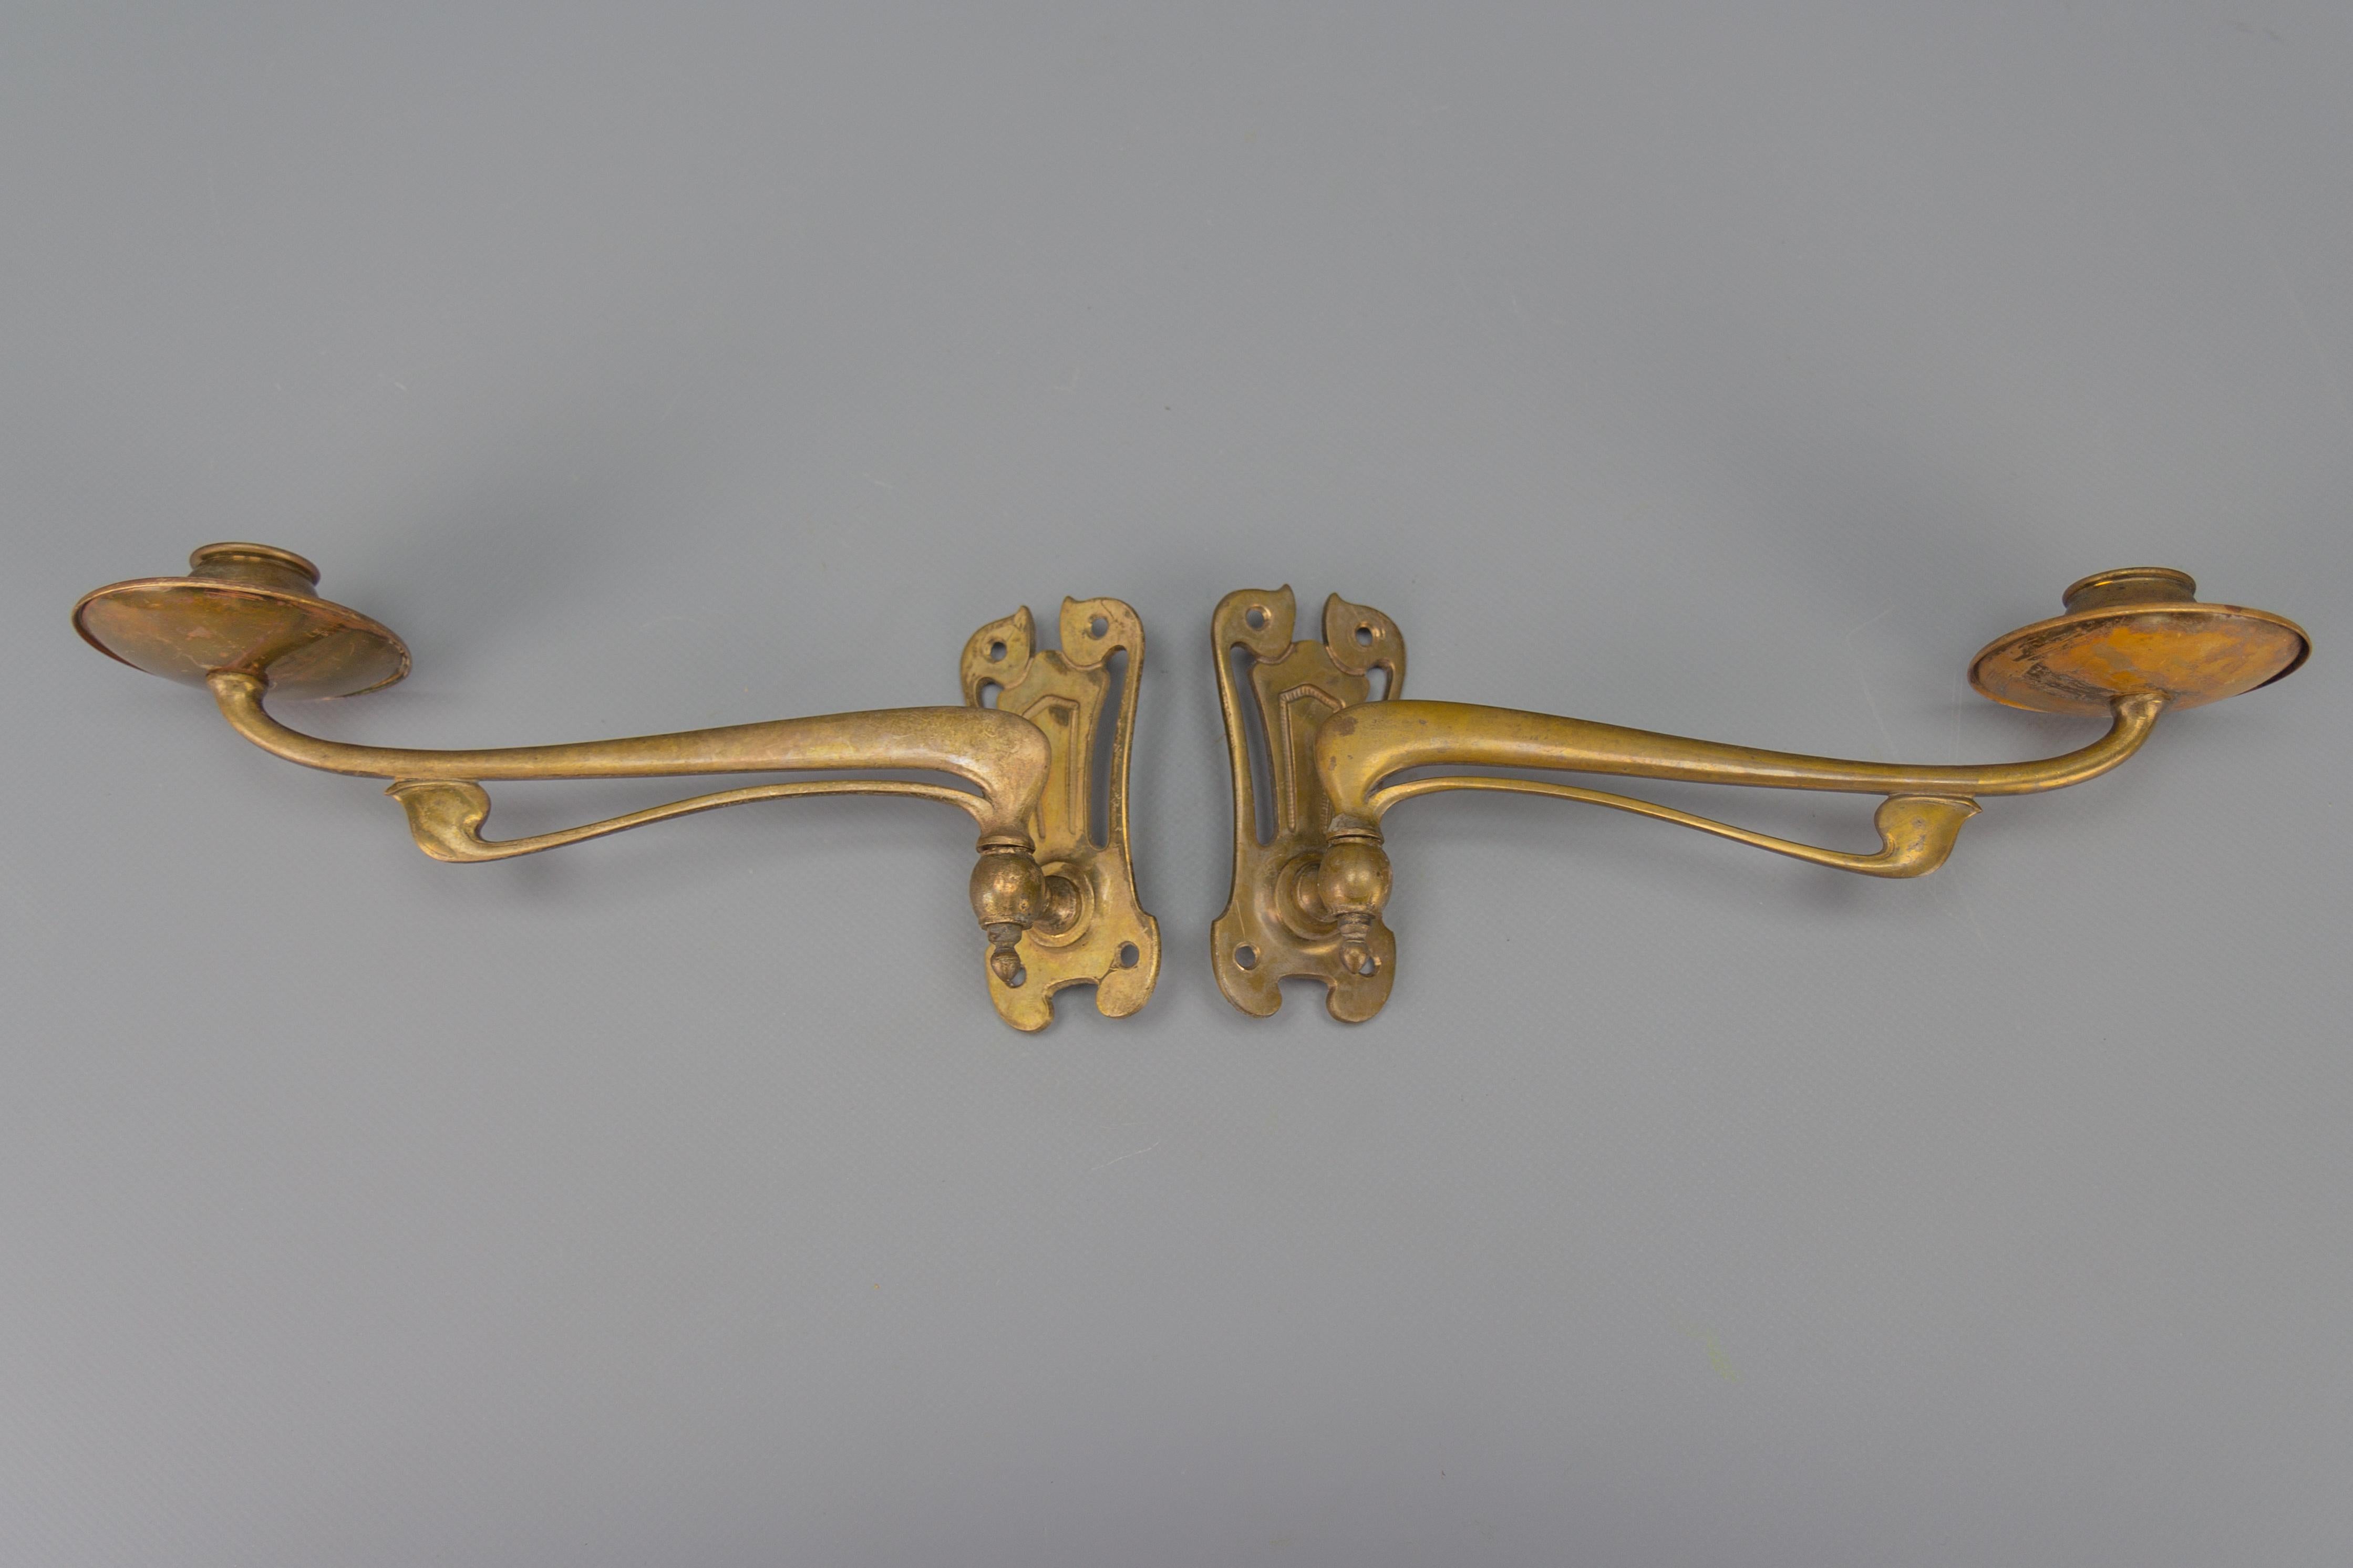 Pair of French Art Nouveau Brass Piano Wall Sconces Swivel Candle Holders, 1920 For Sale 12